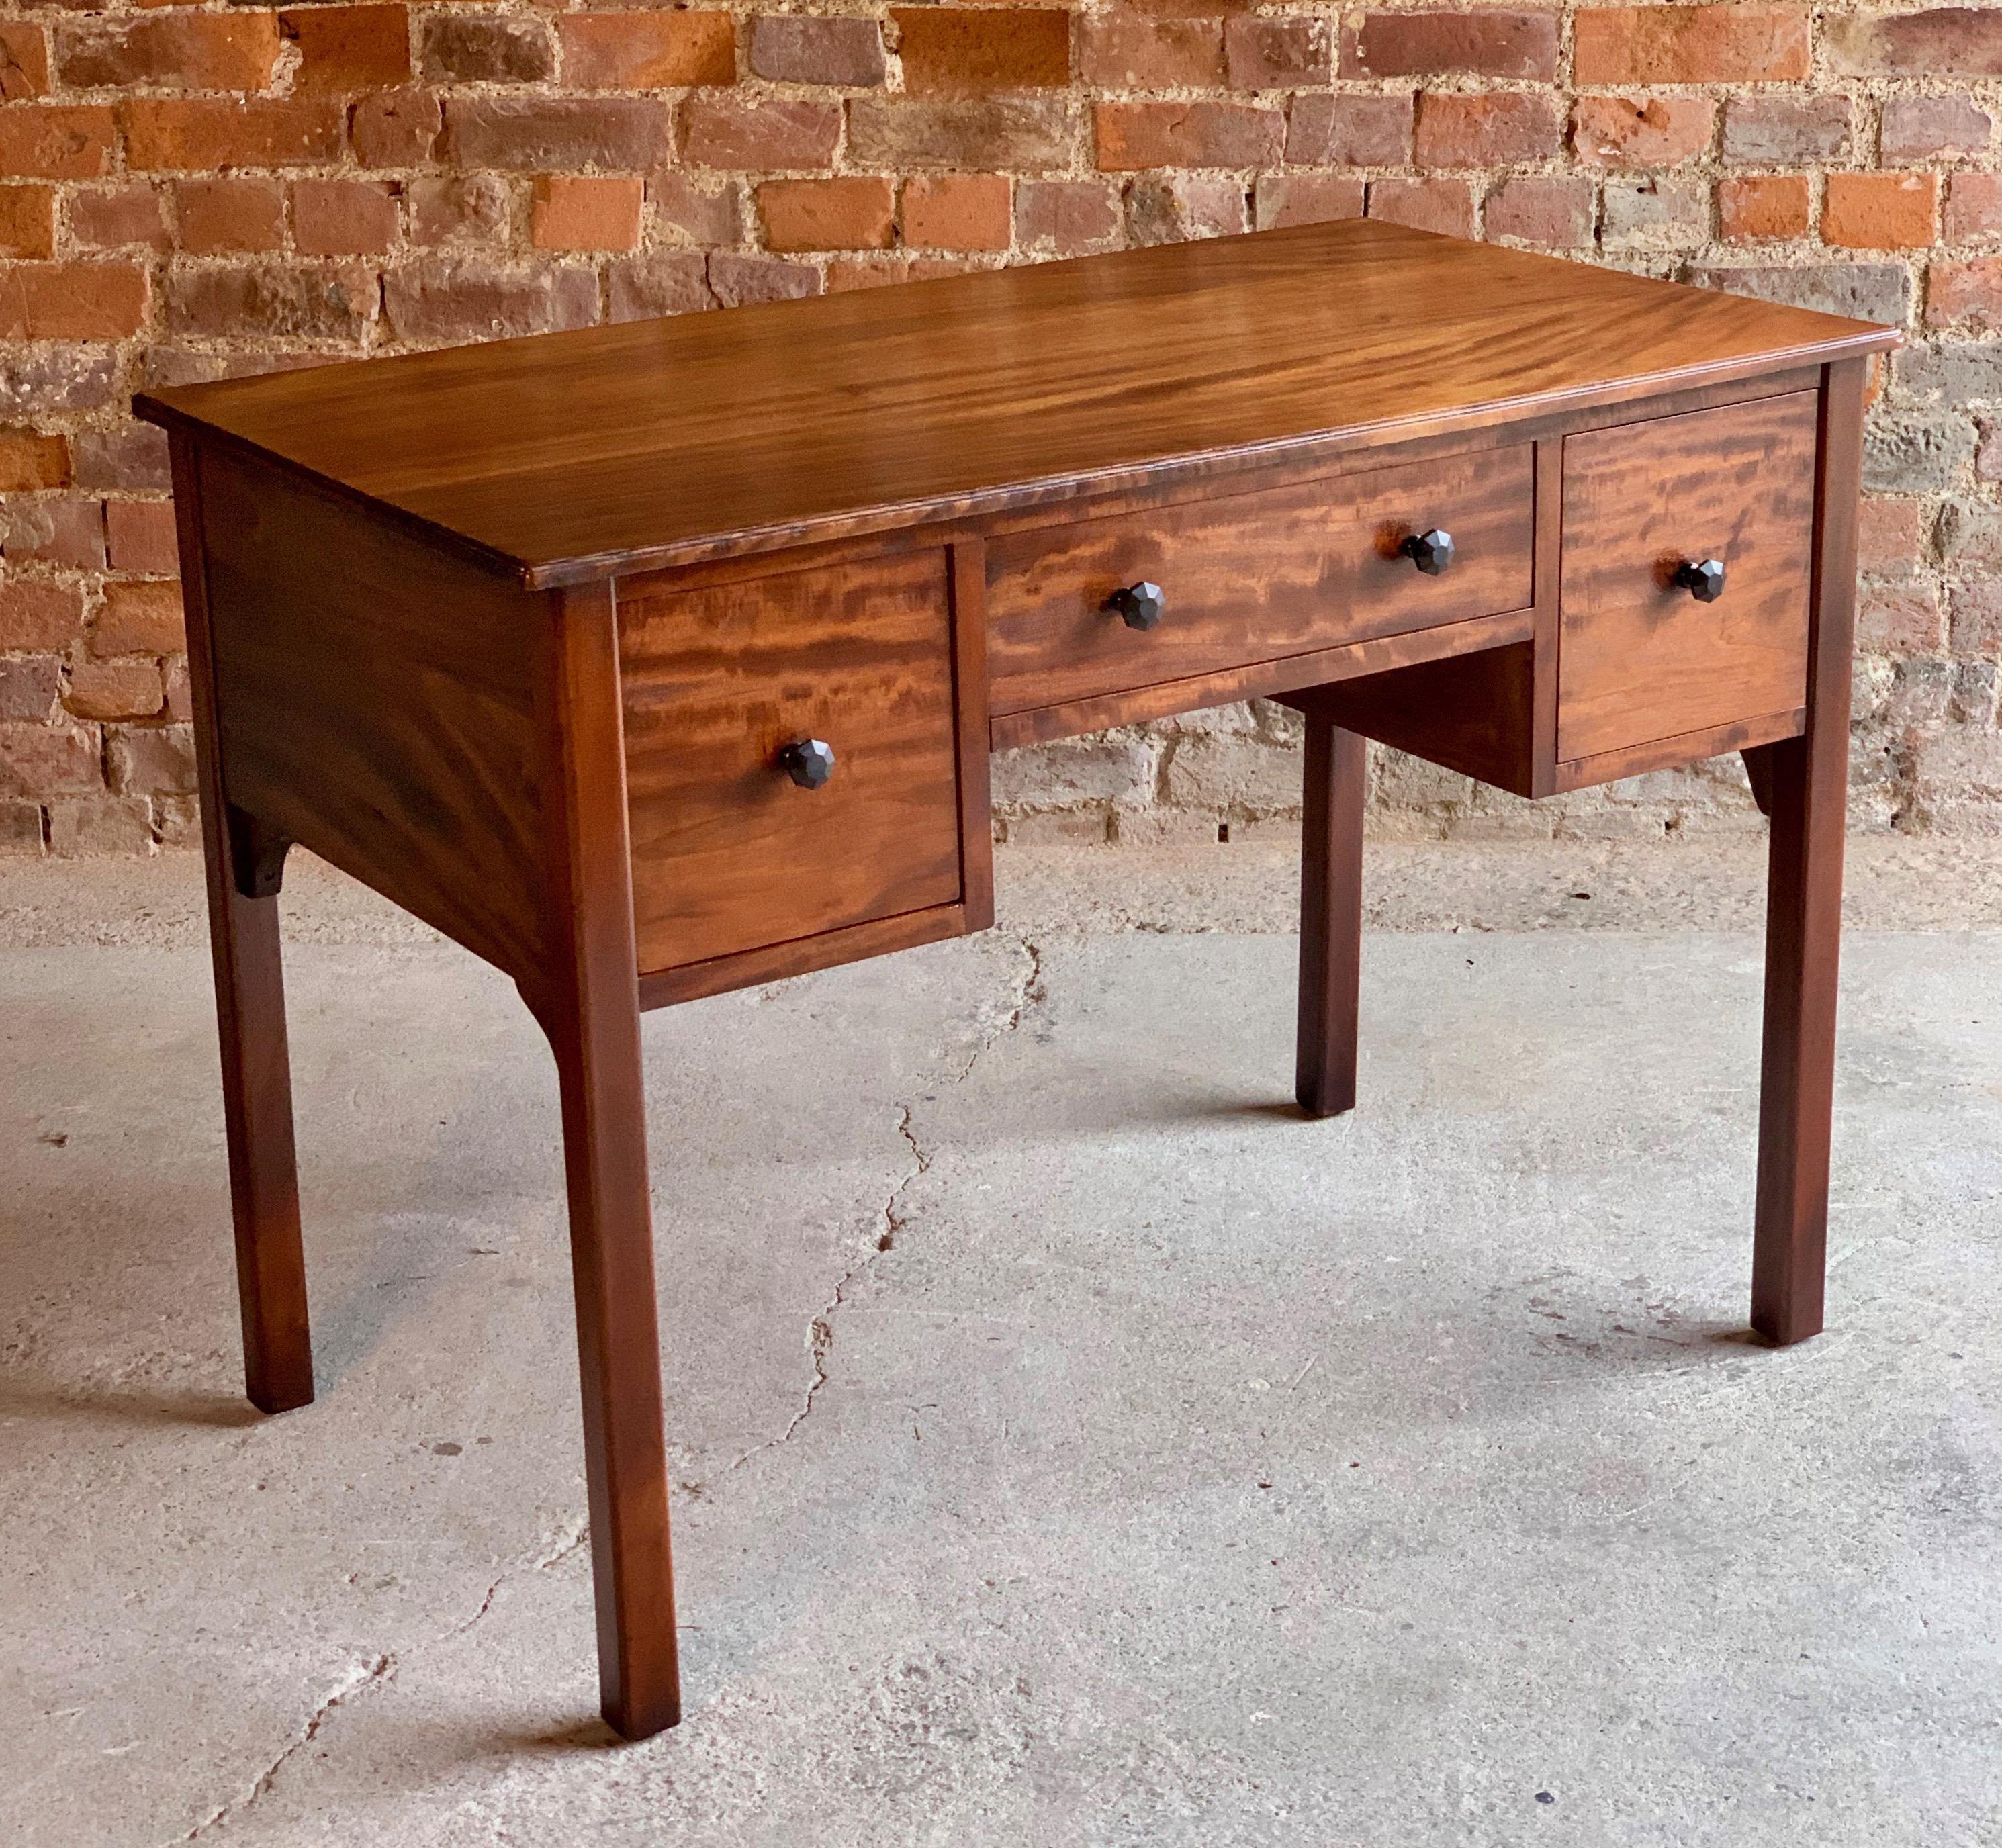 Gordon Russell cuban mahogany writing desk 1929

Extremely rare Gordon Russell Cuban mahogany, Cedar lined writing desk, designed by Gordon Russell, dated September 14th 1929, the moulded rectangular top fitted over three drawers with turned and